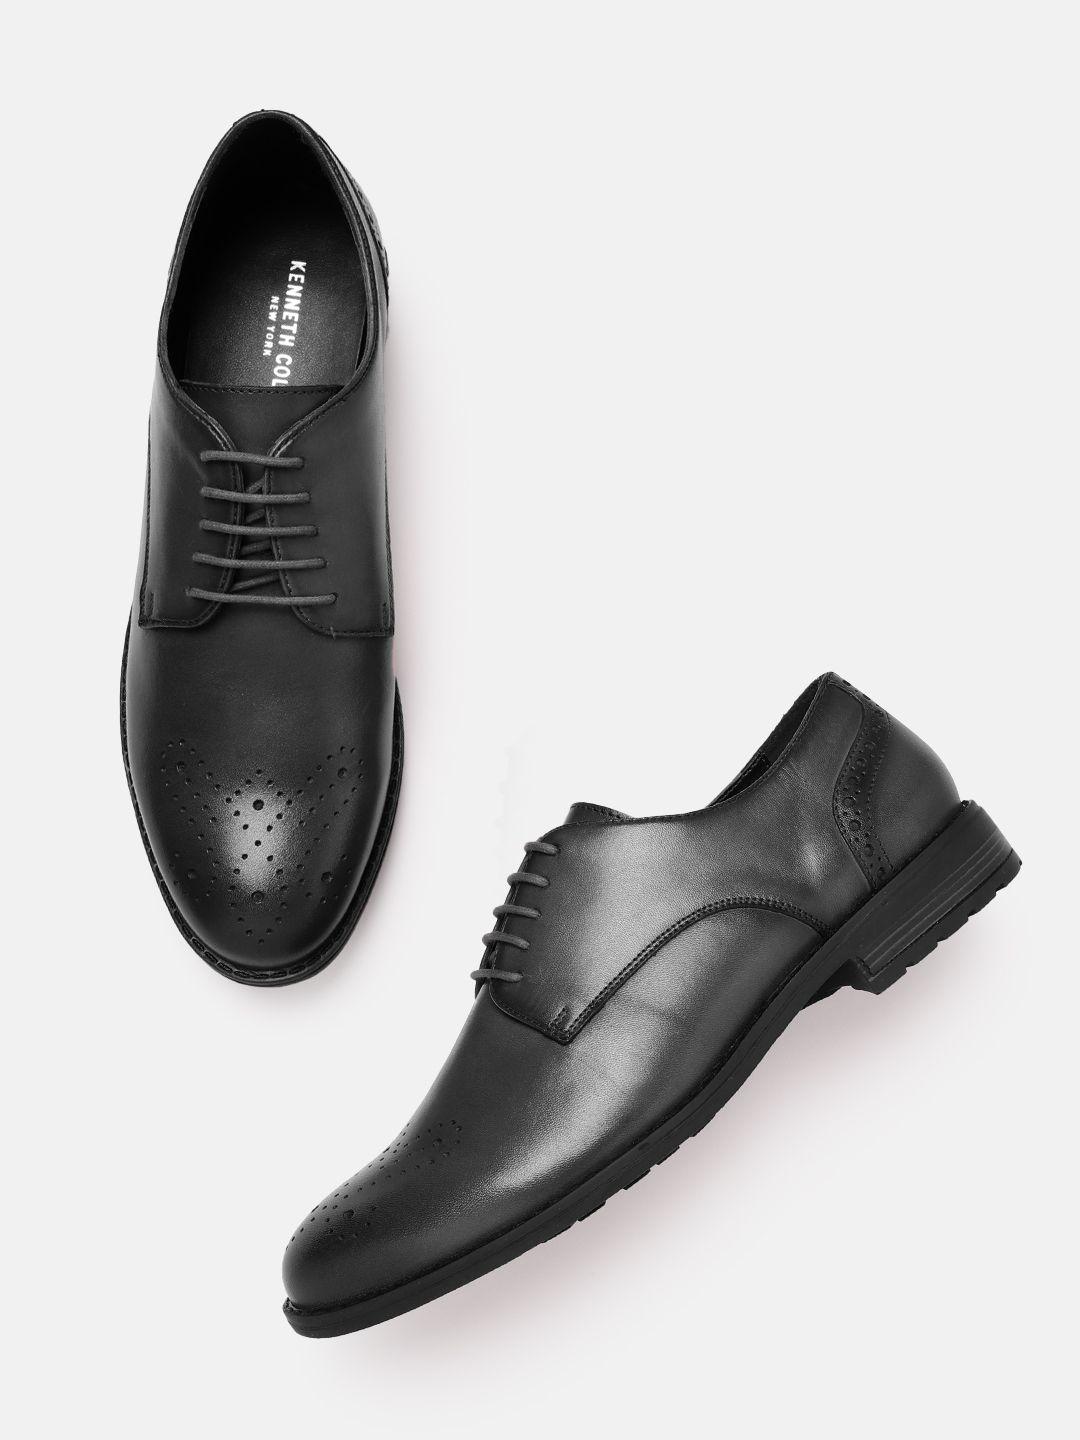 kenneth-cole-men-lace-up-perforated-formal-oxfords